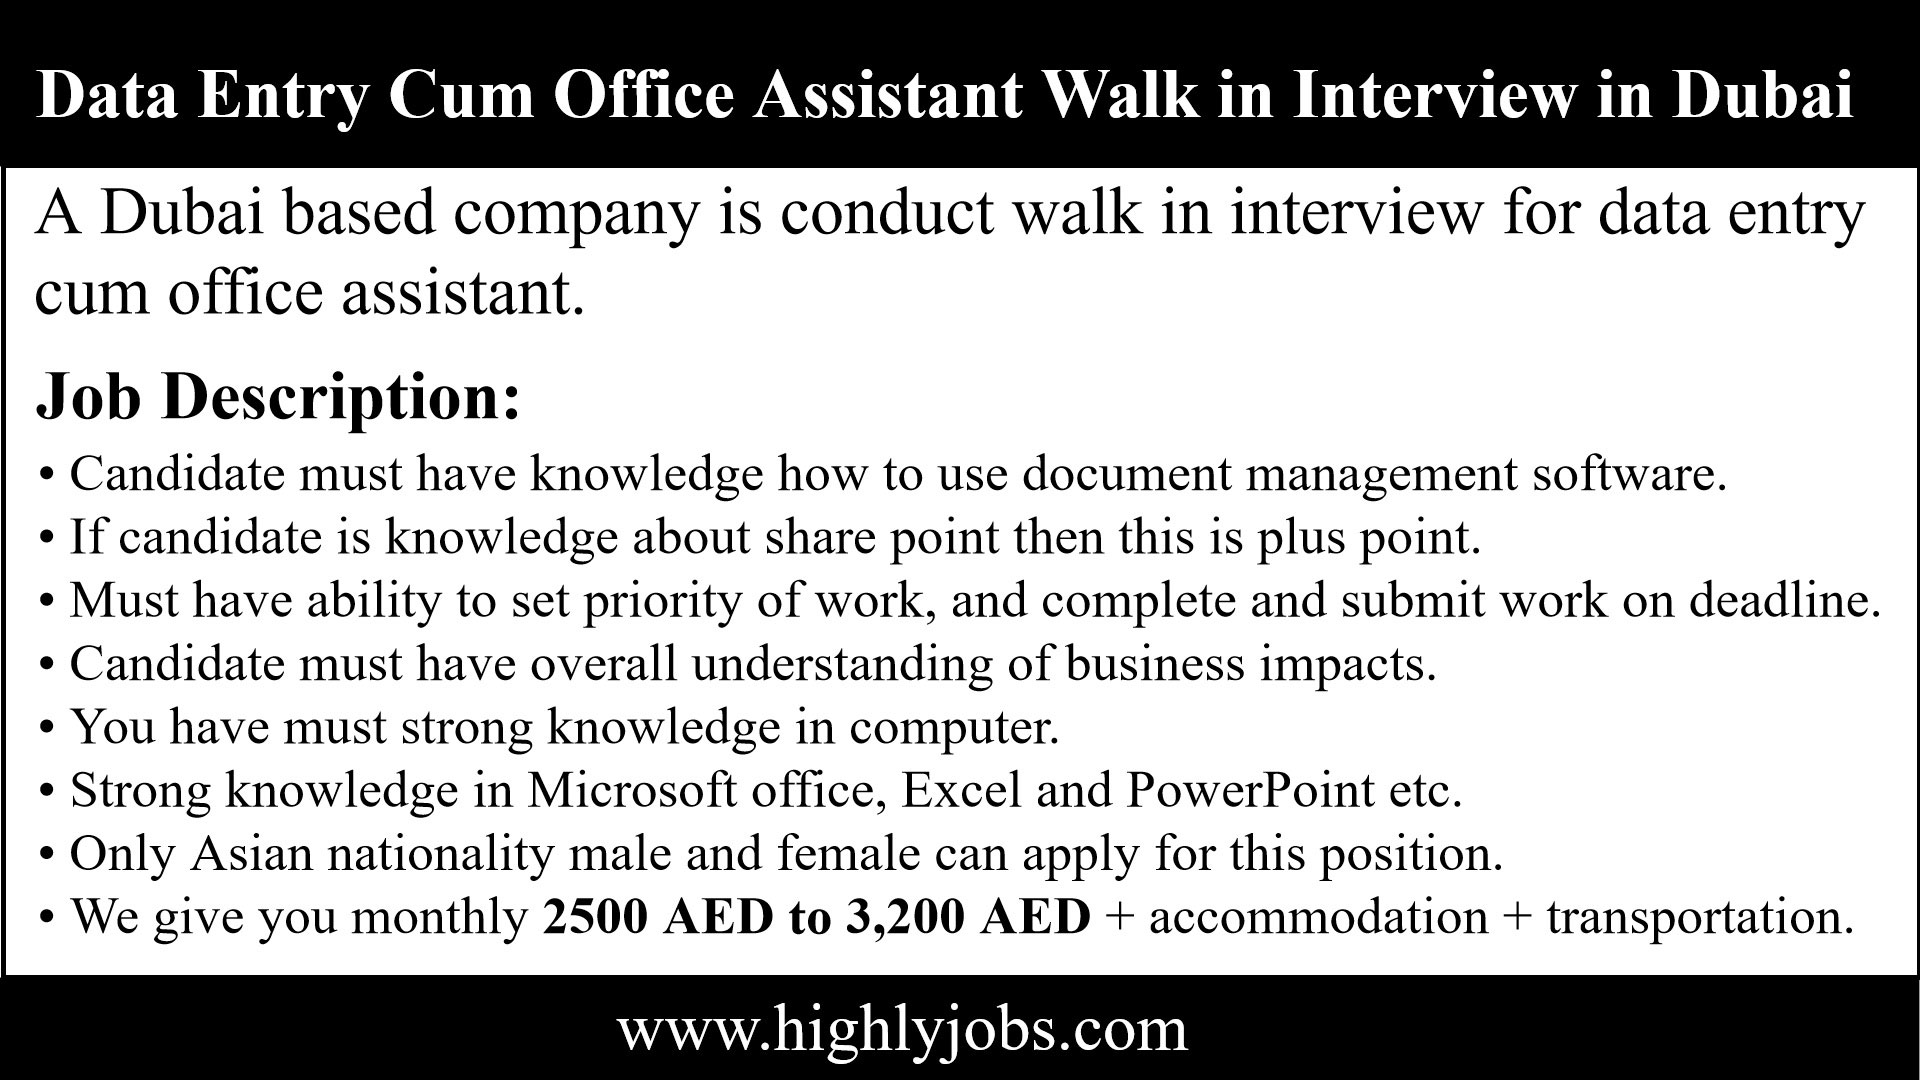 Walk in interview for Data Entry and Office Assistant Job in Dubai